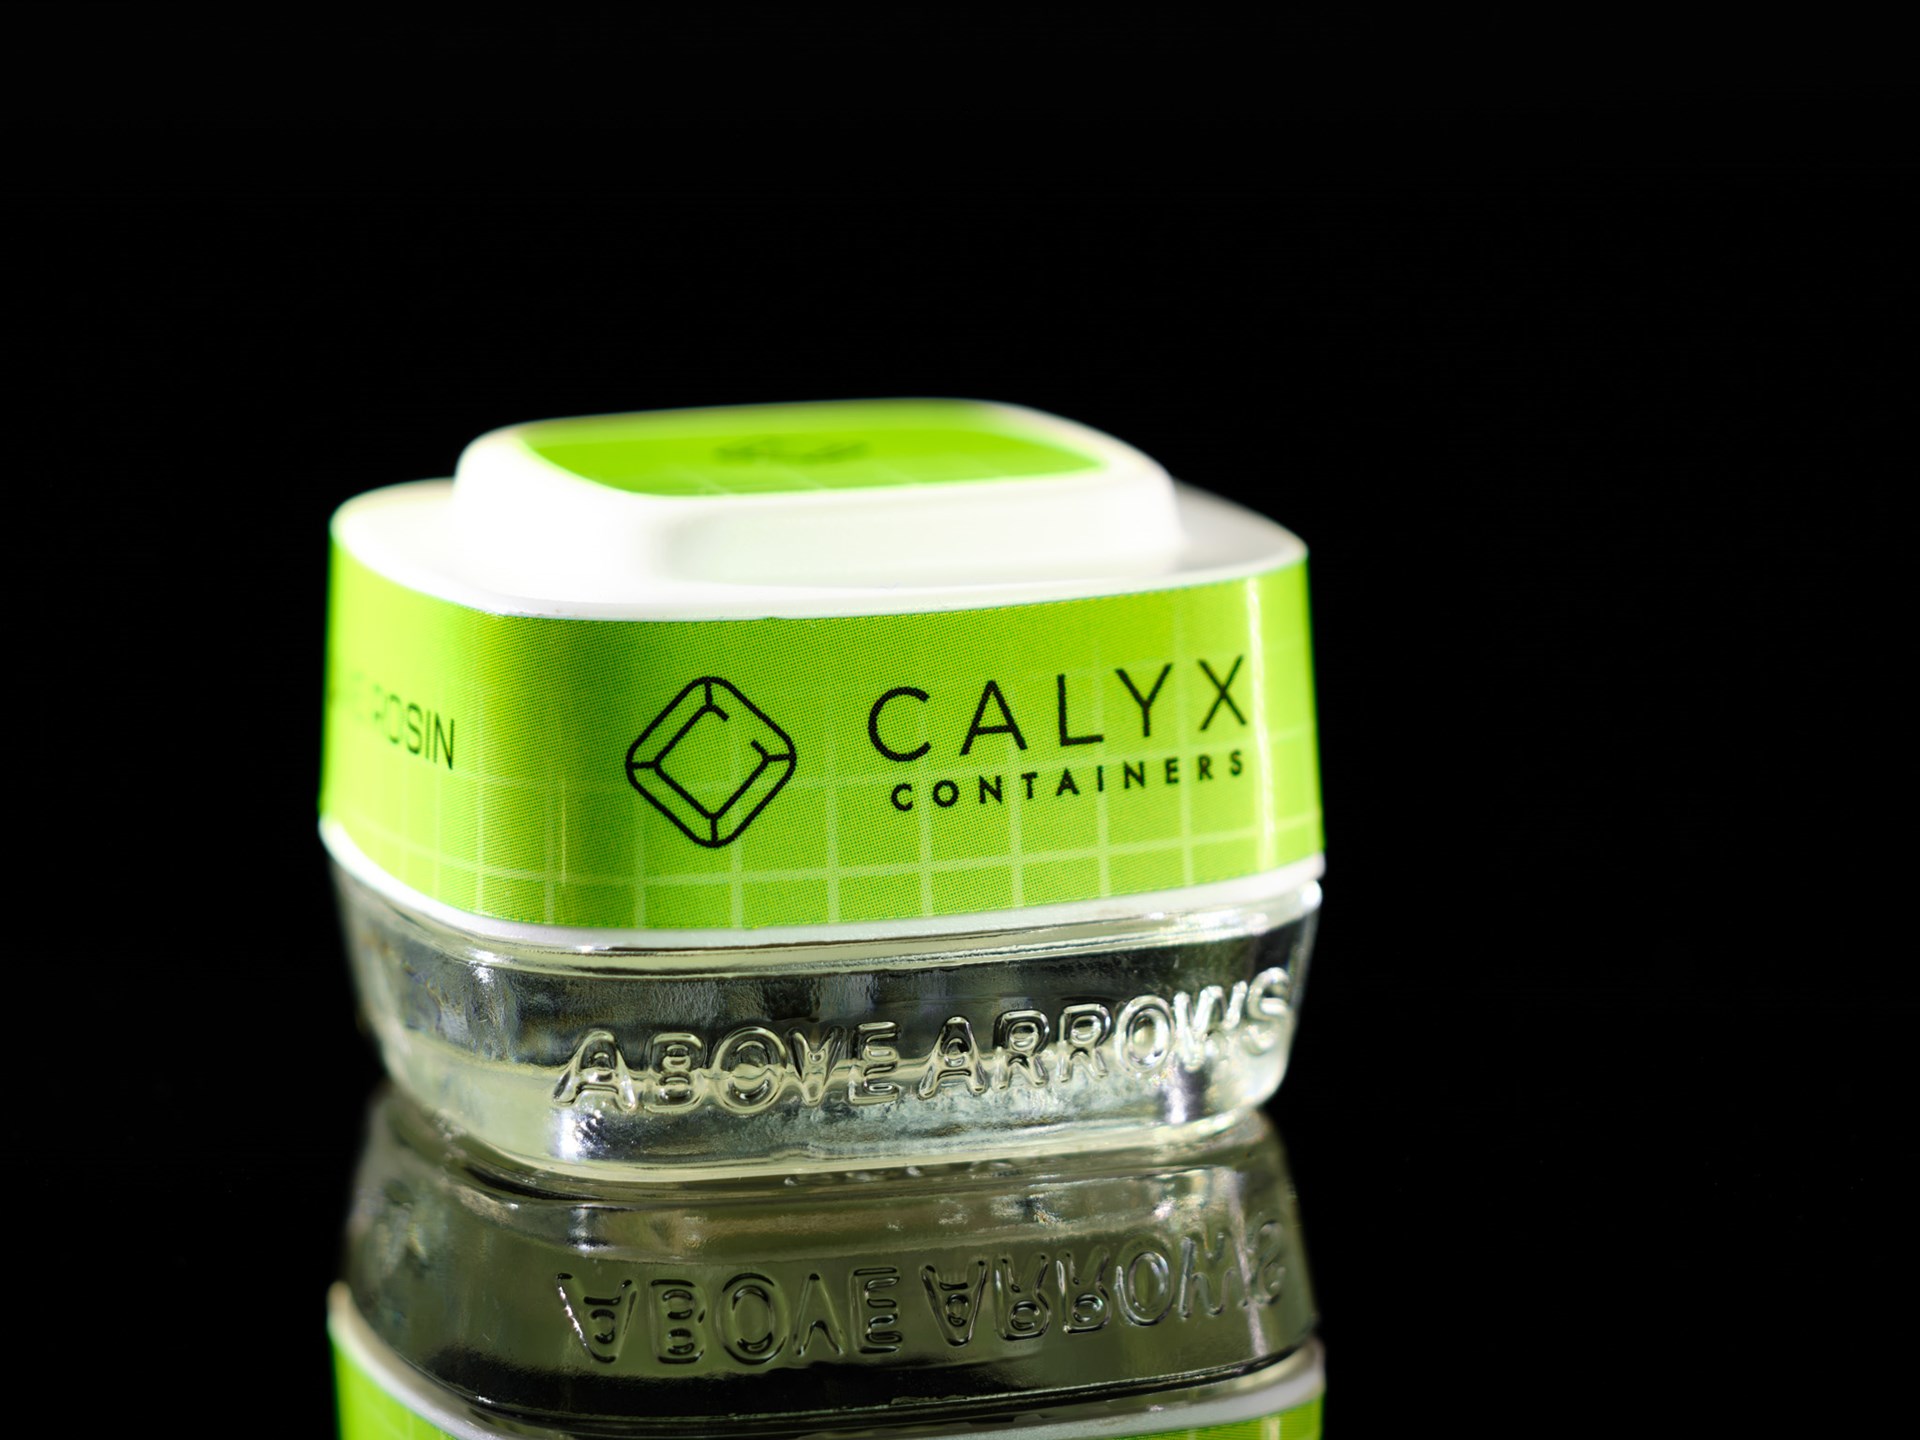 Close-up of a Calyx cannabis concentrate container with bright green Calyx branding